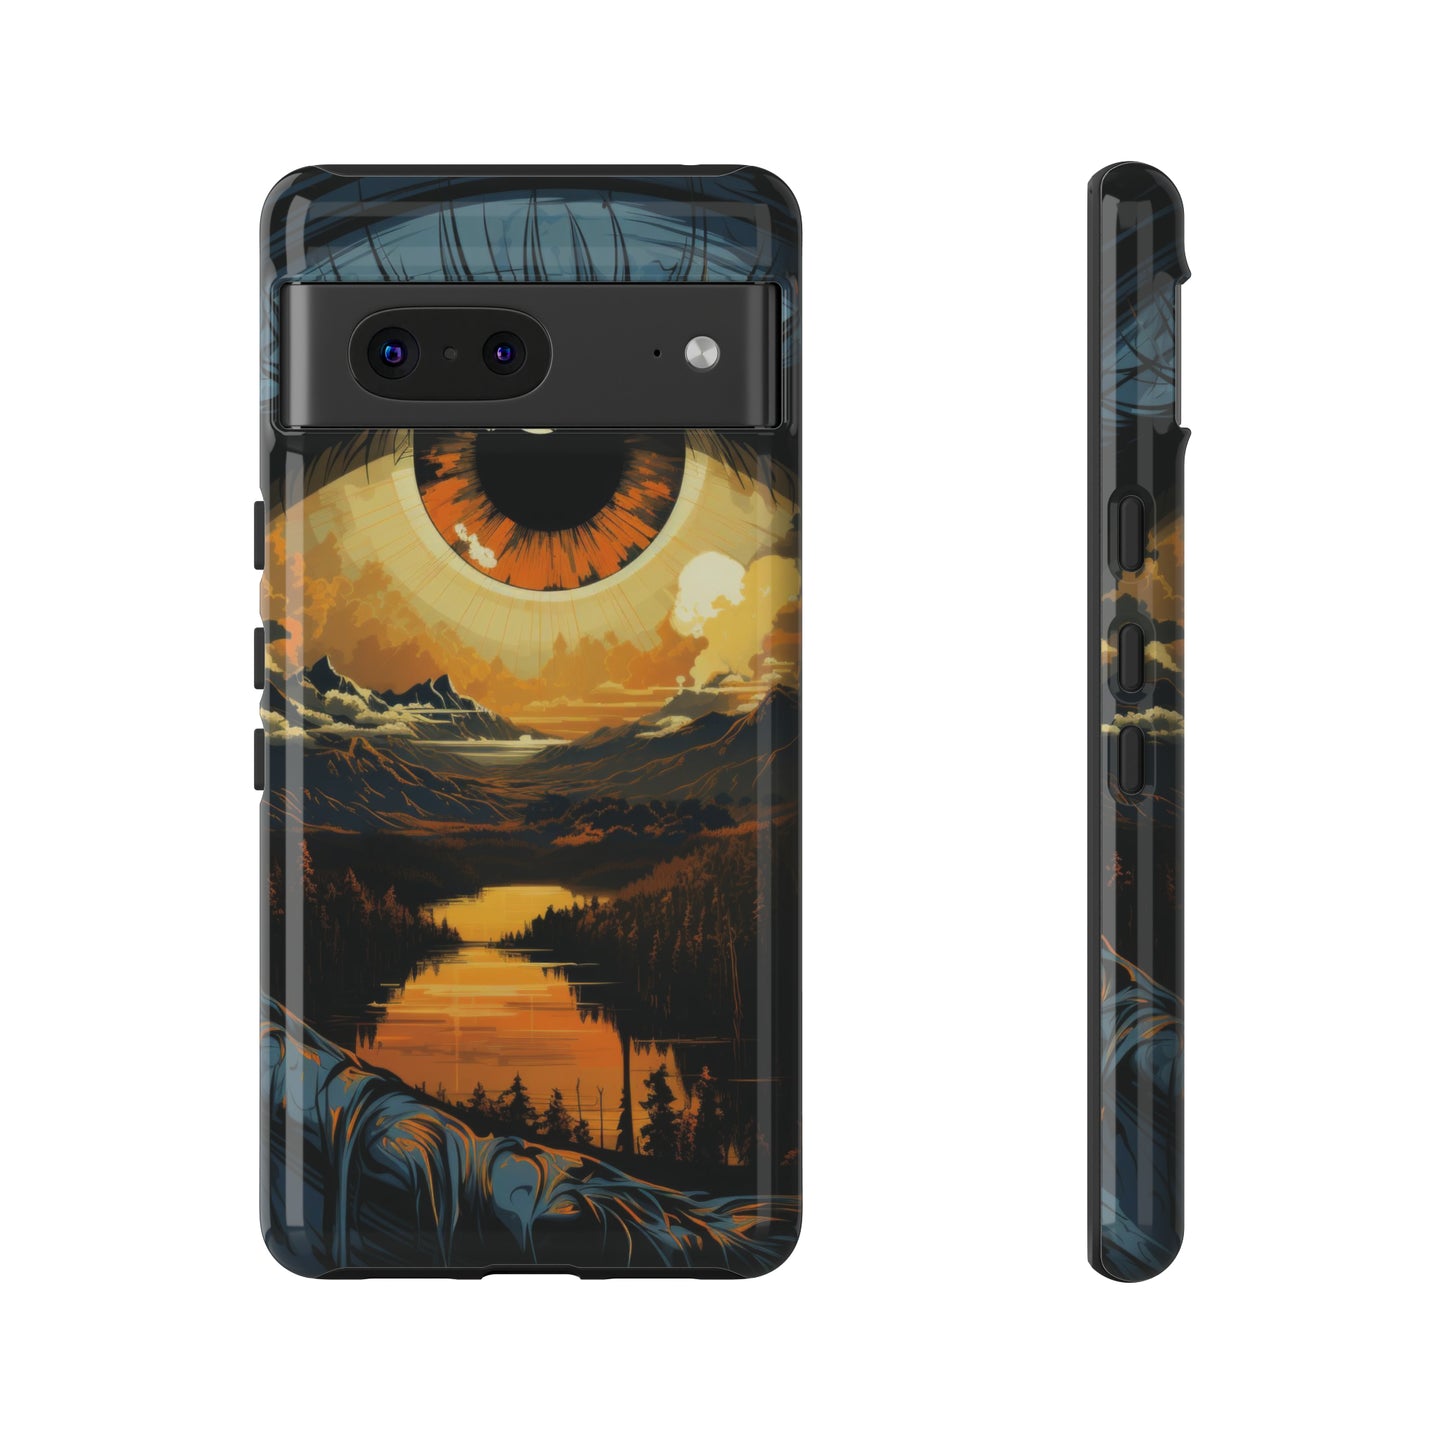 Eyescape: Surreal Valley River Gaze Phone Case for iPhone, Samsung, Pixel